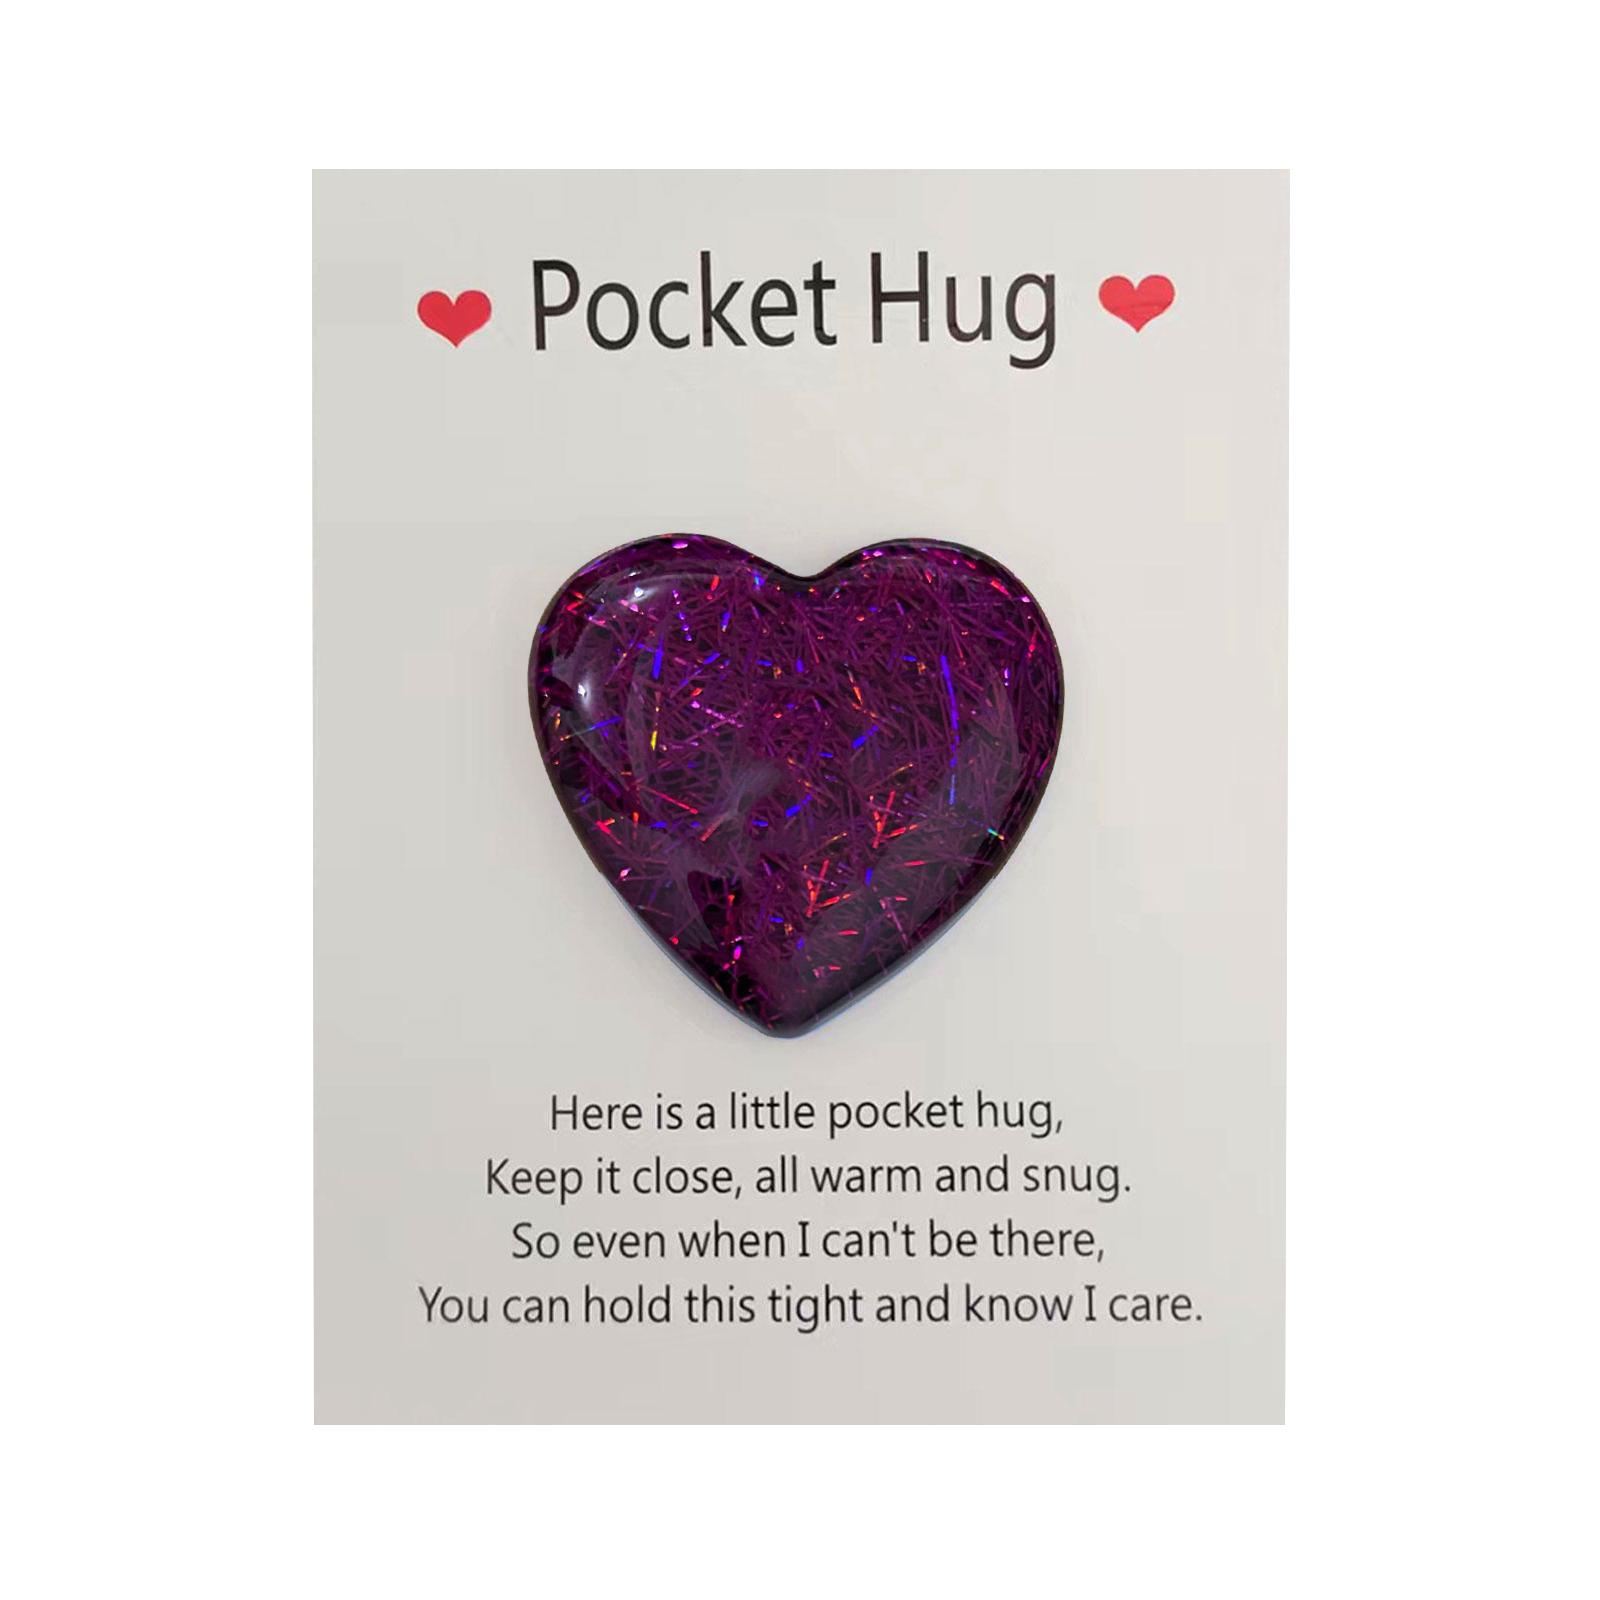 Pocket Hug Heart Token with Greeting Card Mini Cute Pocket Hug Decoration Keepsake Cheer up Gifts for Friends Colleagues Family - image 1 of 5